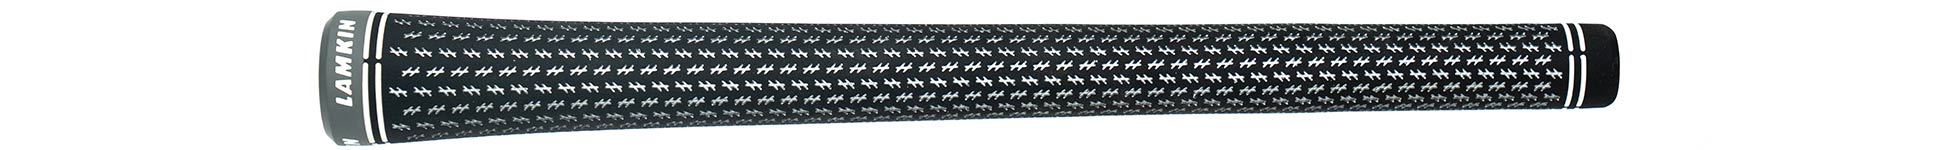 The TaylorMade SIM2 Max Irons - pic of the Lamkin Crossline 360 grip.